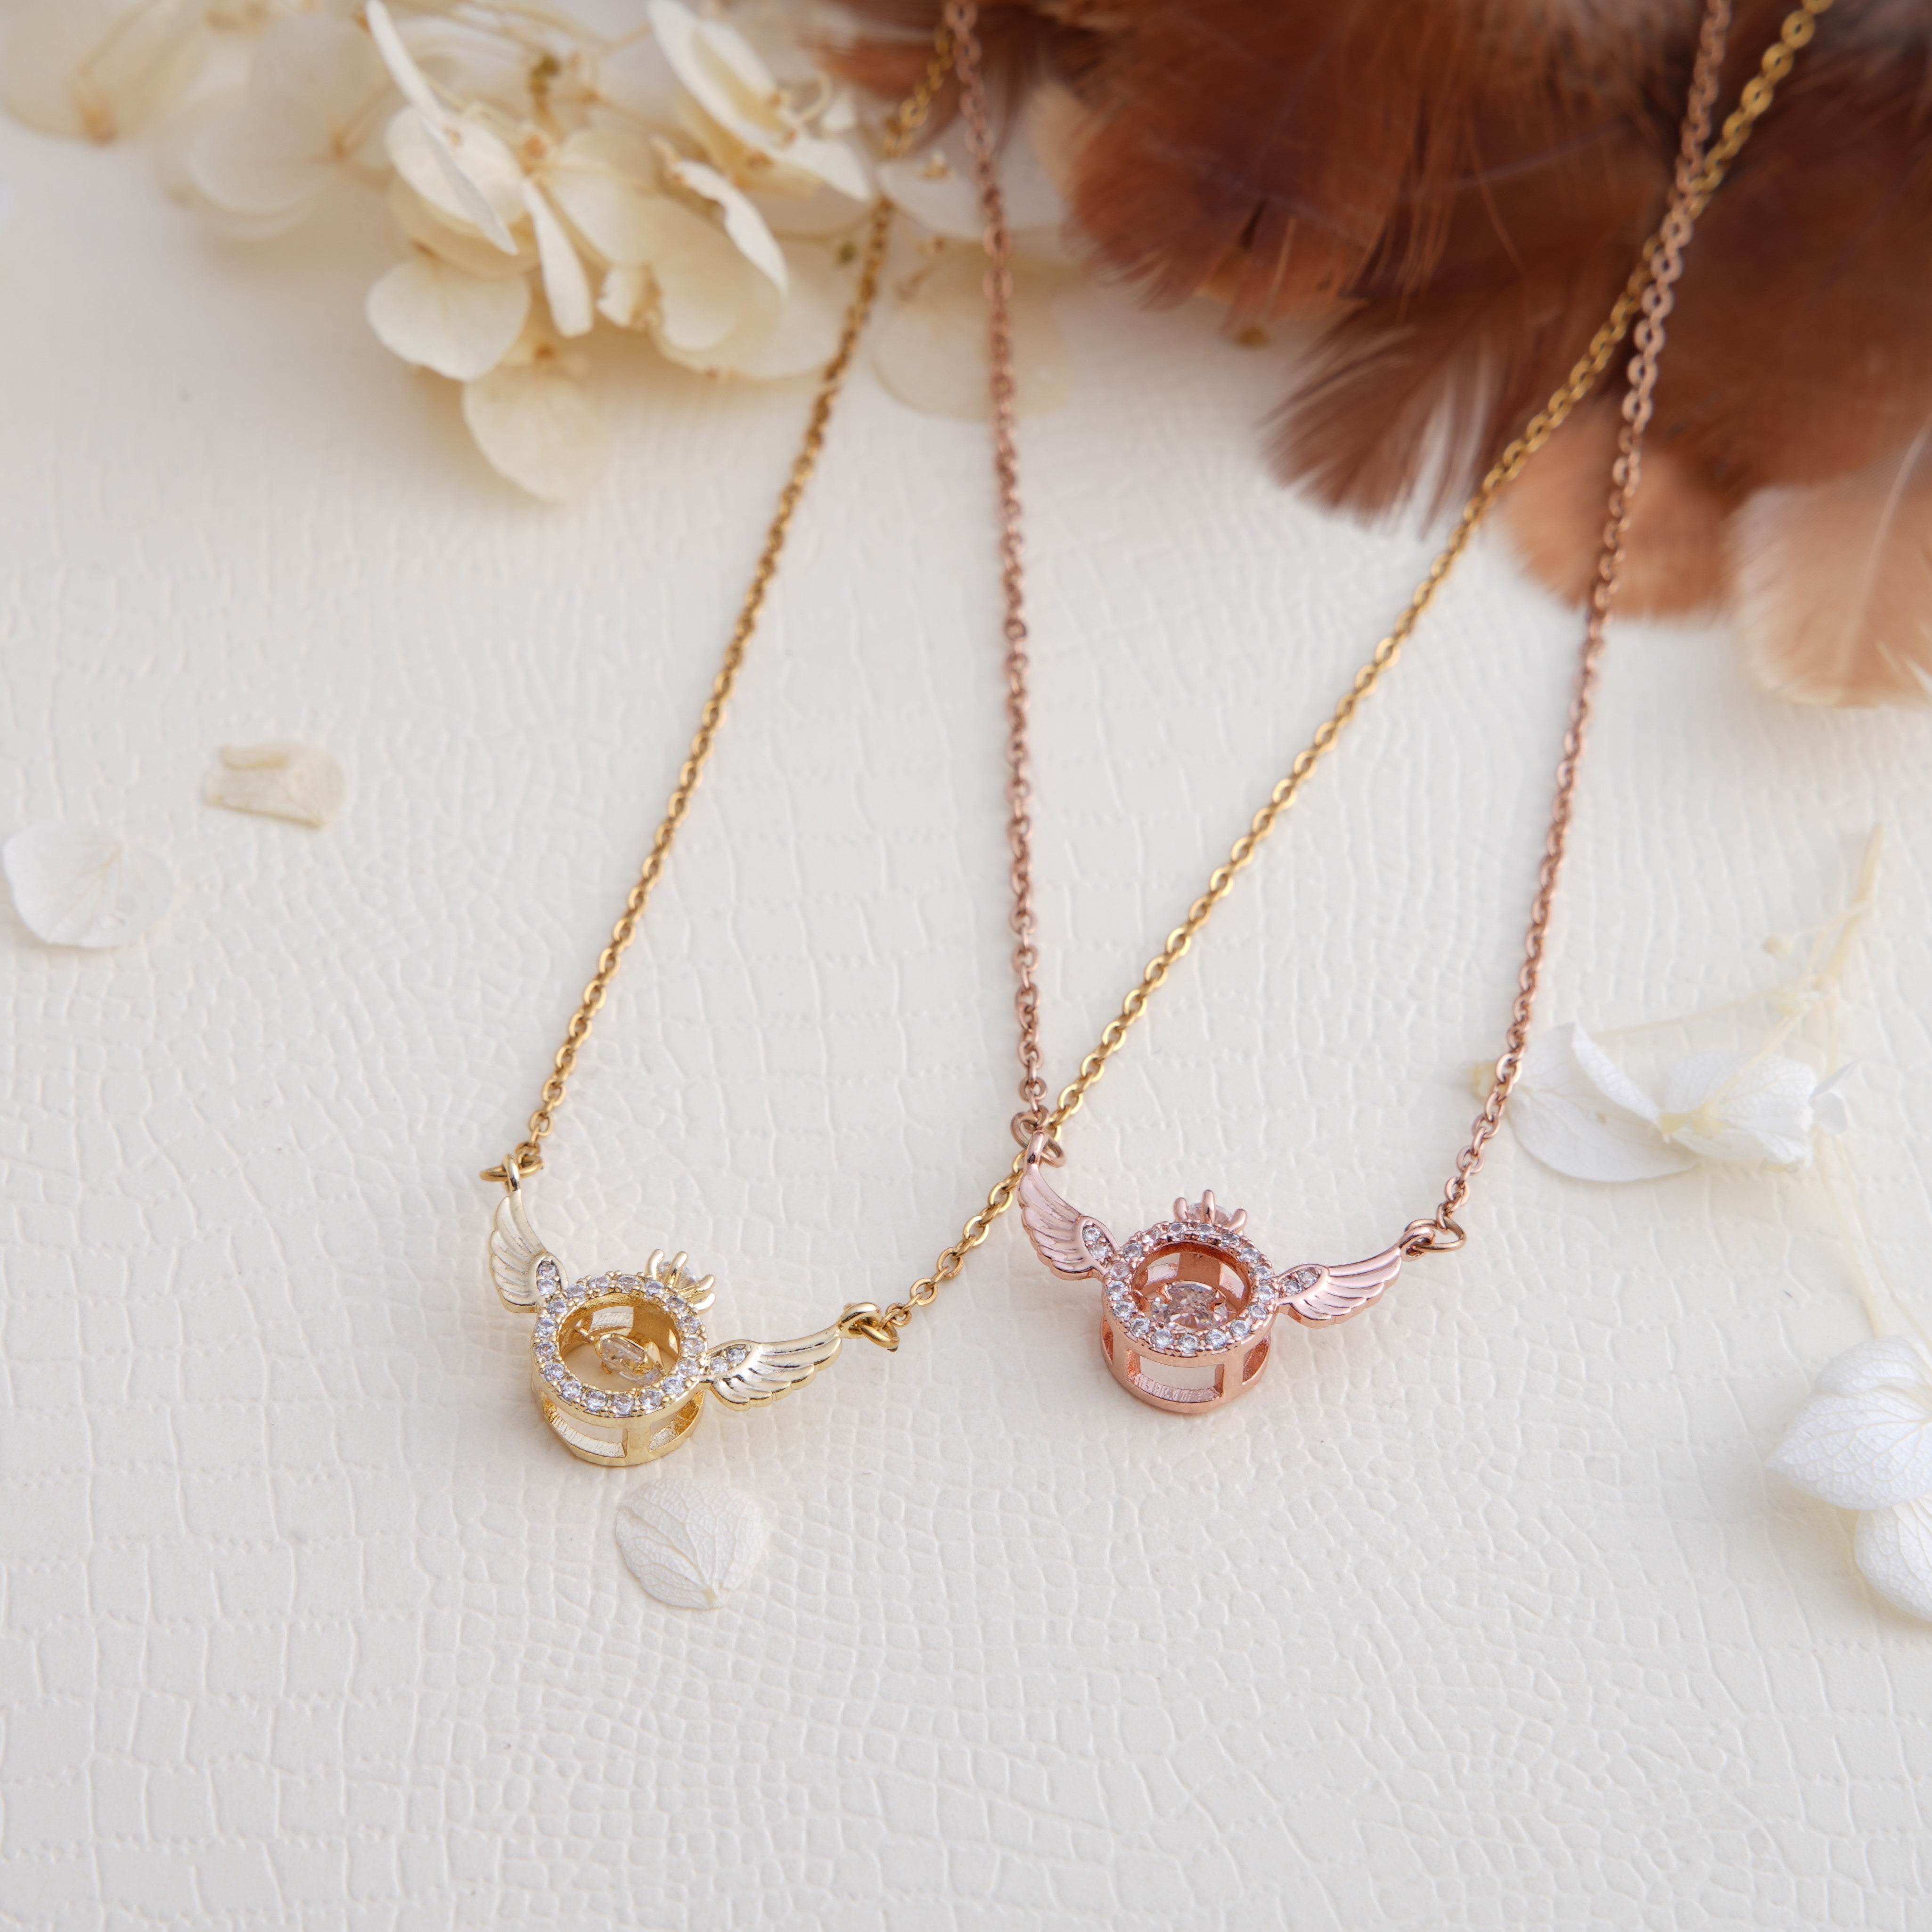 Radiance 3-Ring Necklace with Accents in Gold, Rhodium and Rose Gold